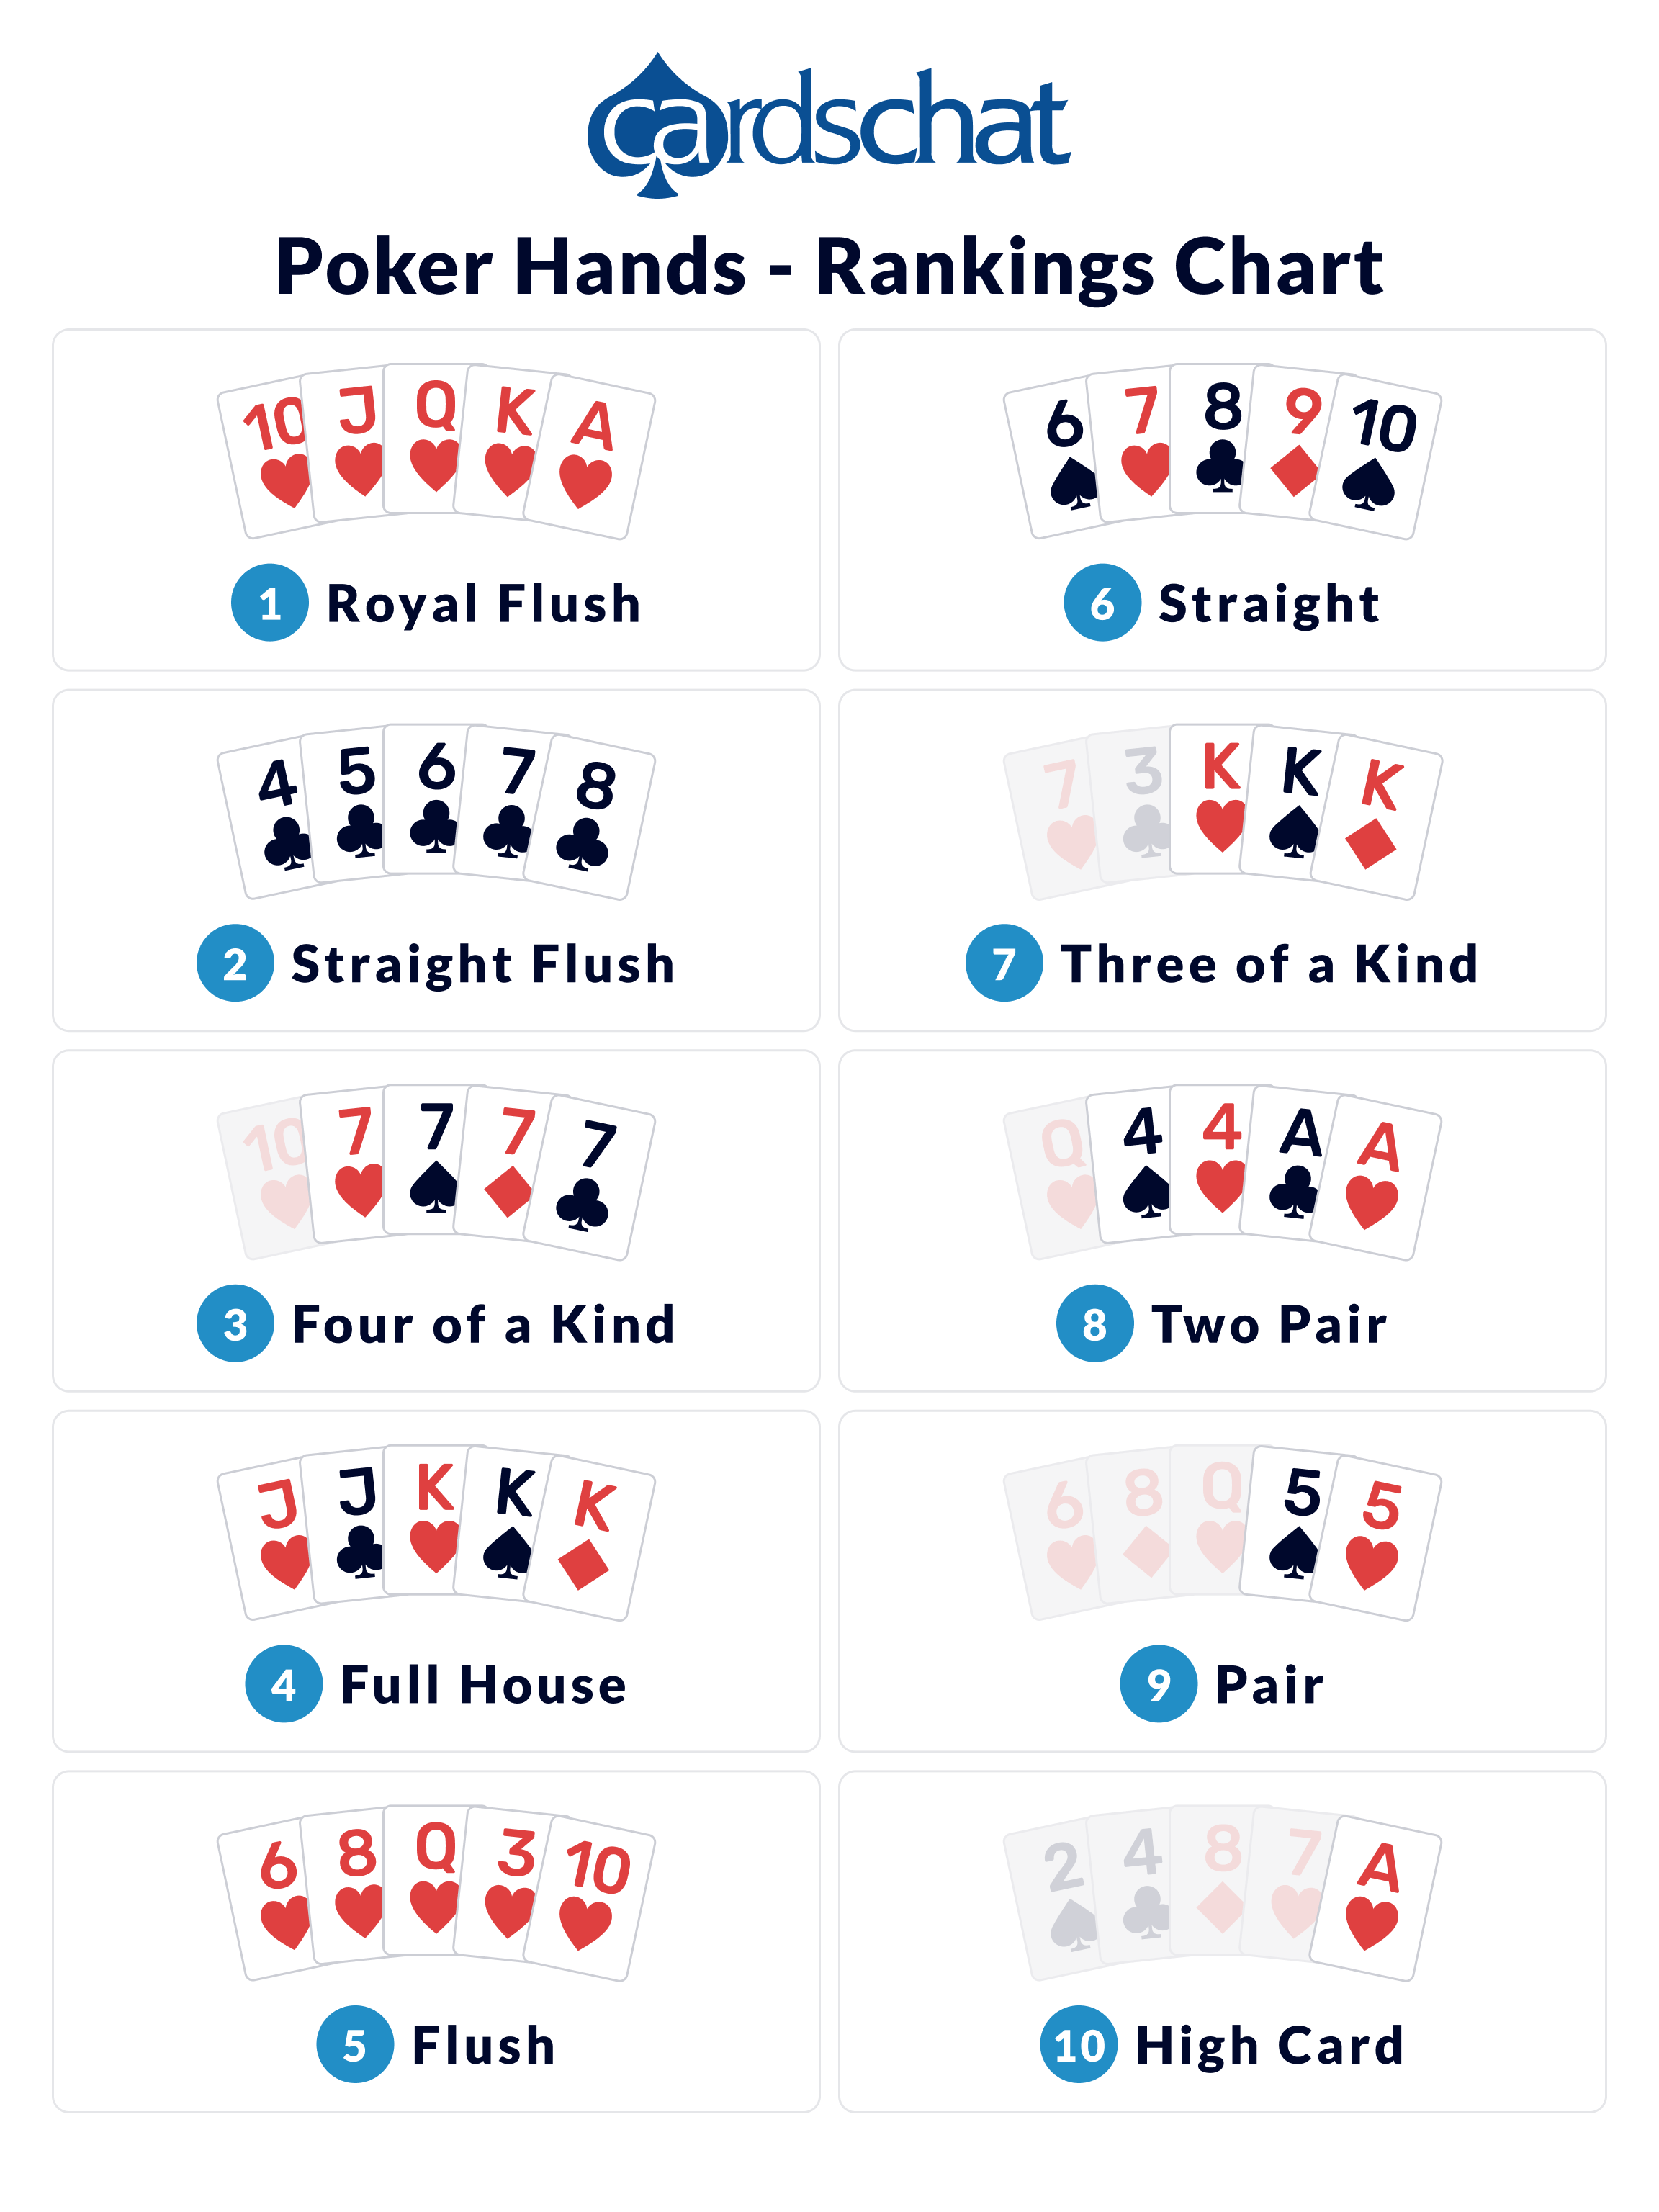 what are the poker hands worst